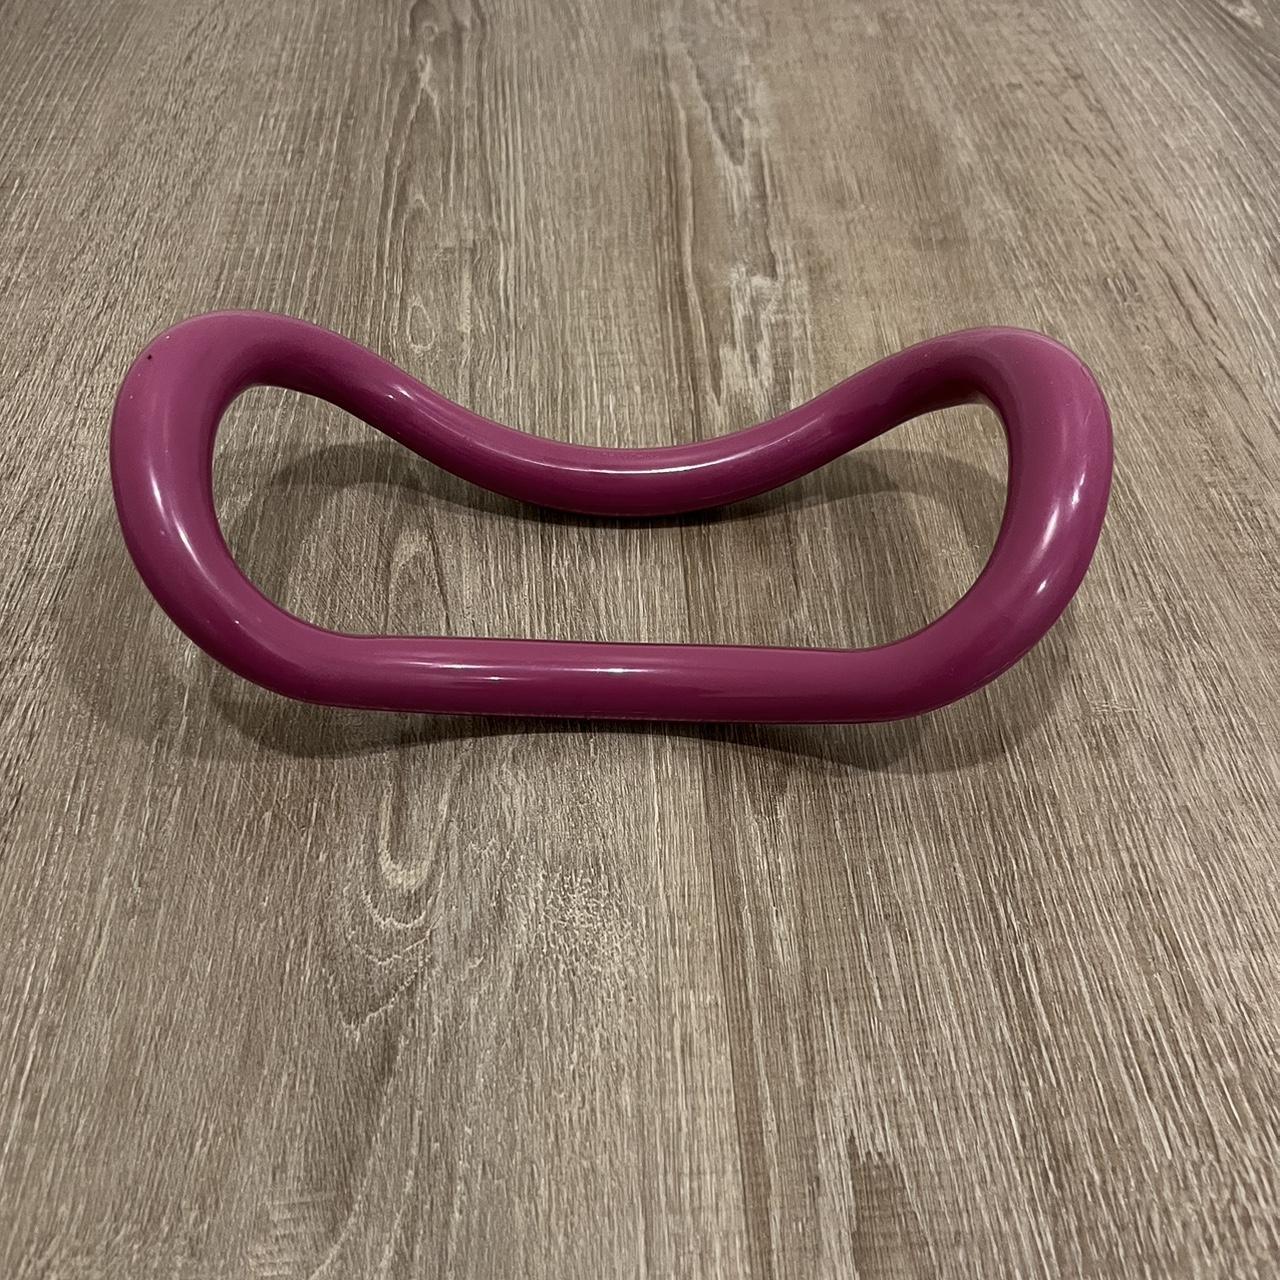 Lomi Fitness Yoga Ring Never used but there is a - Depop